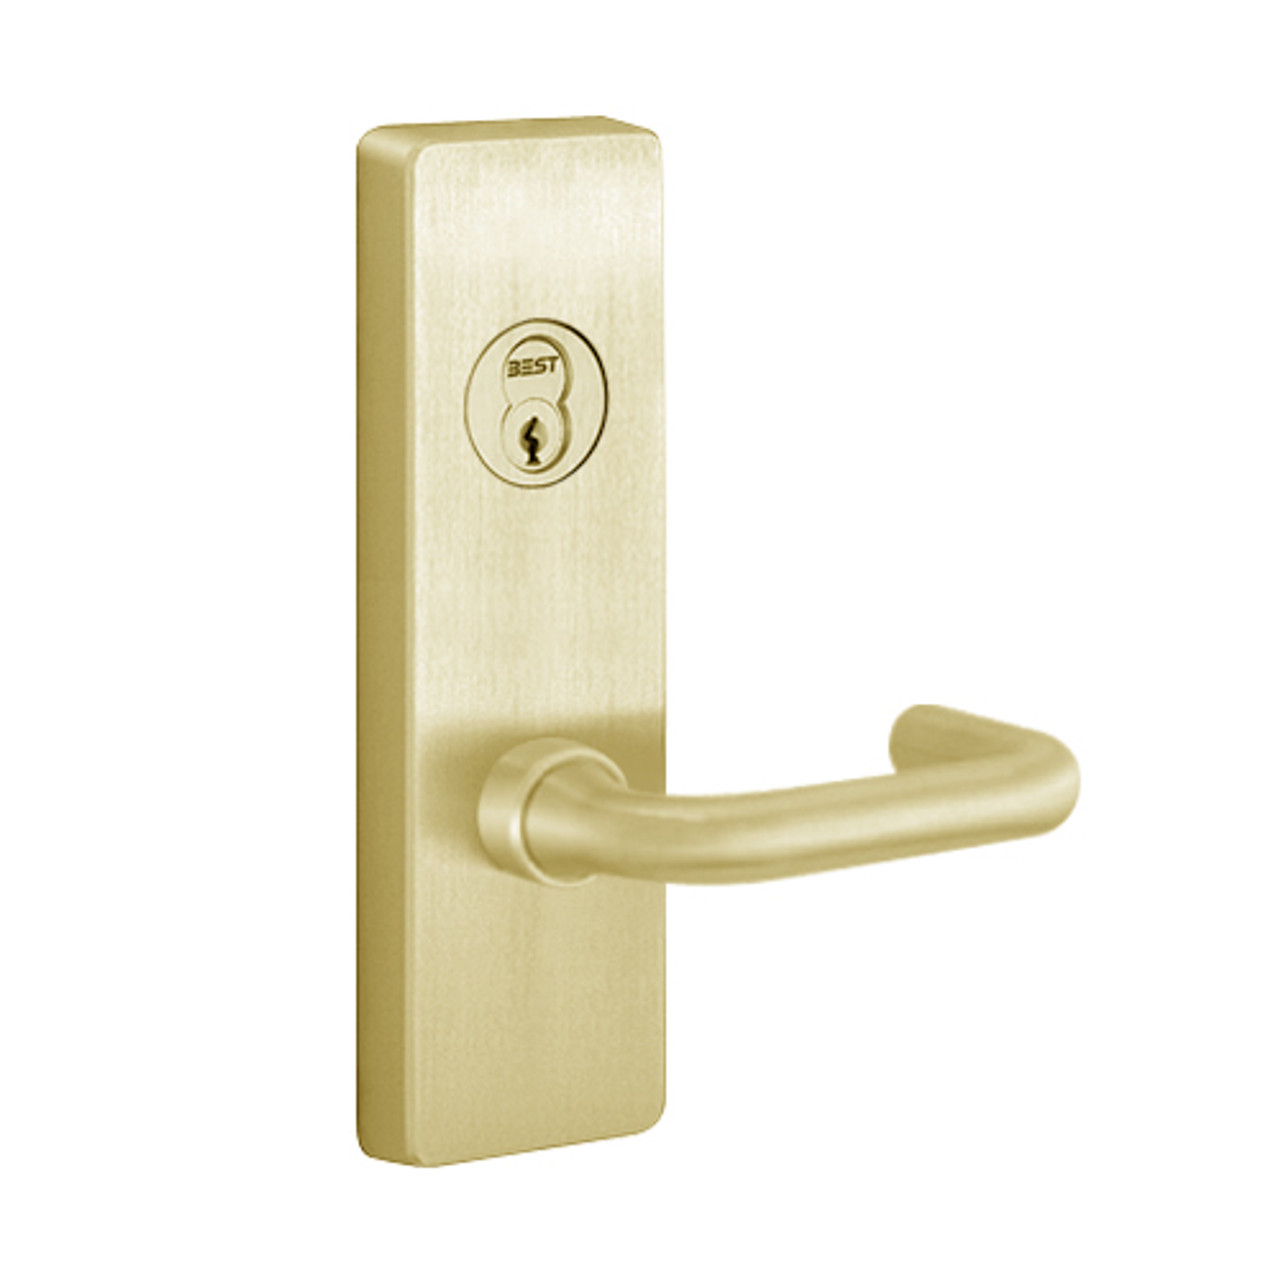 RV4908C-605-LHR PHI Key Controls Lever Vandal Resistant Retrofit Trim with C Lever Design for Apex and Olympian Series Exit Device in Bright Brass Finish